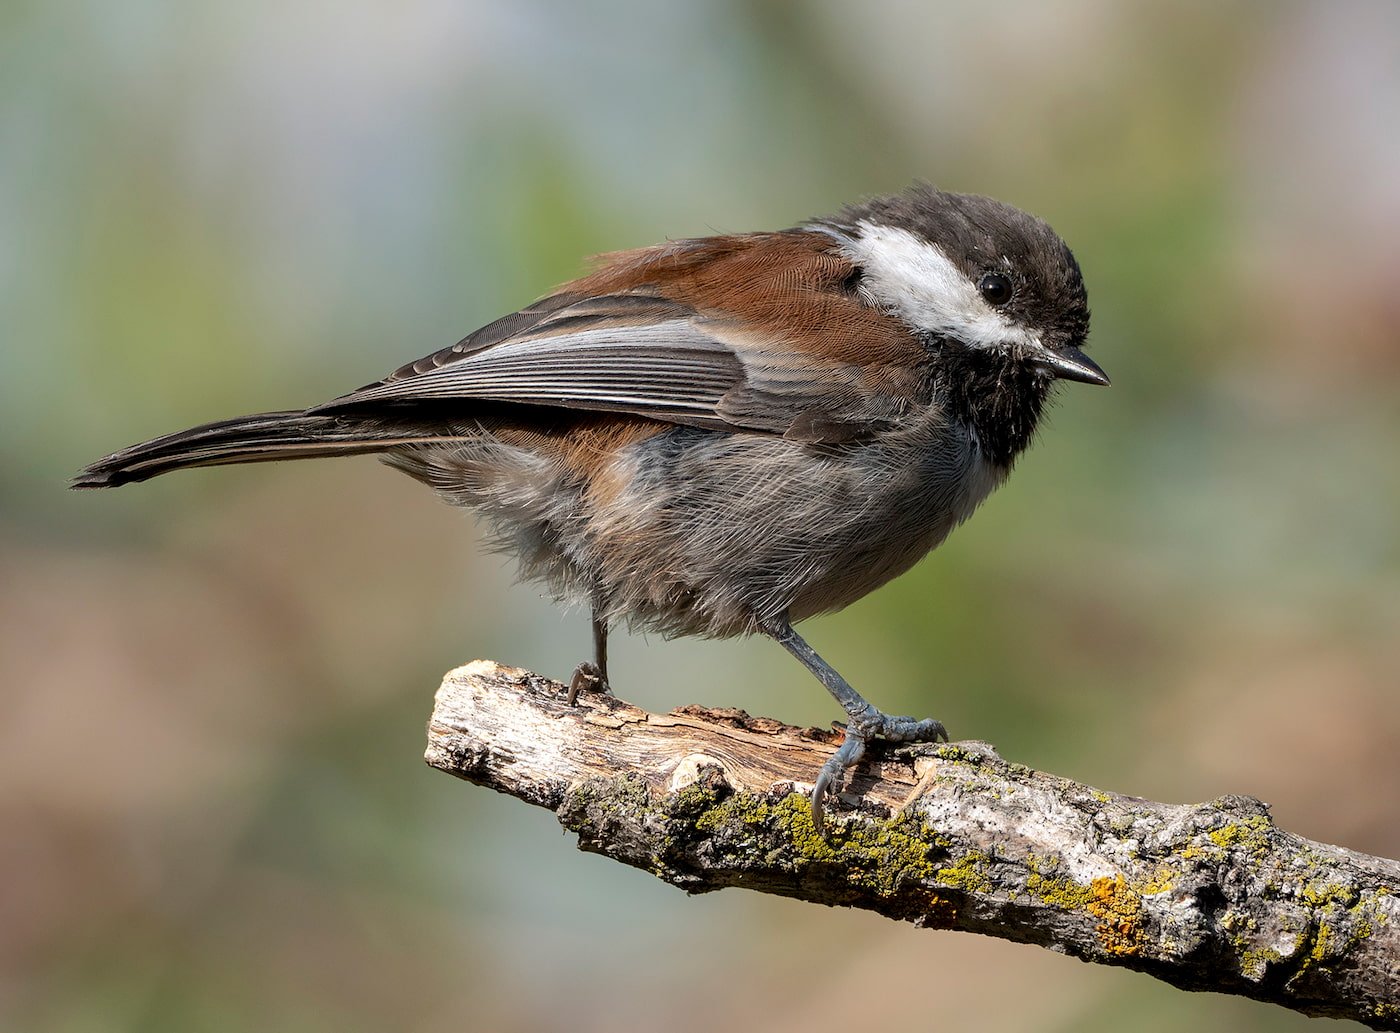 Chestnut-backed chickadee. Photo by Doug Greenberg, Flickr Creative Commons.